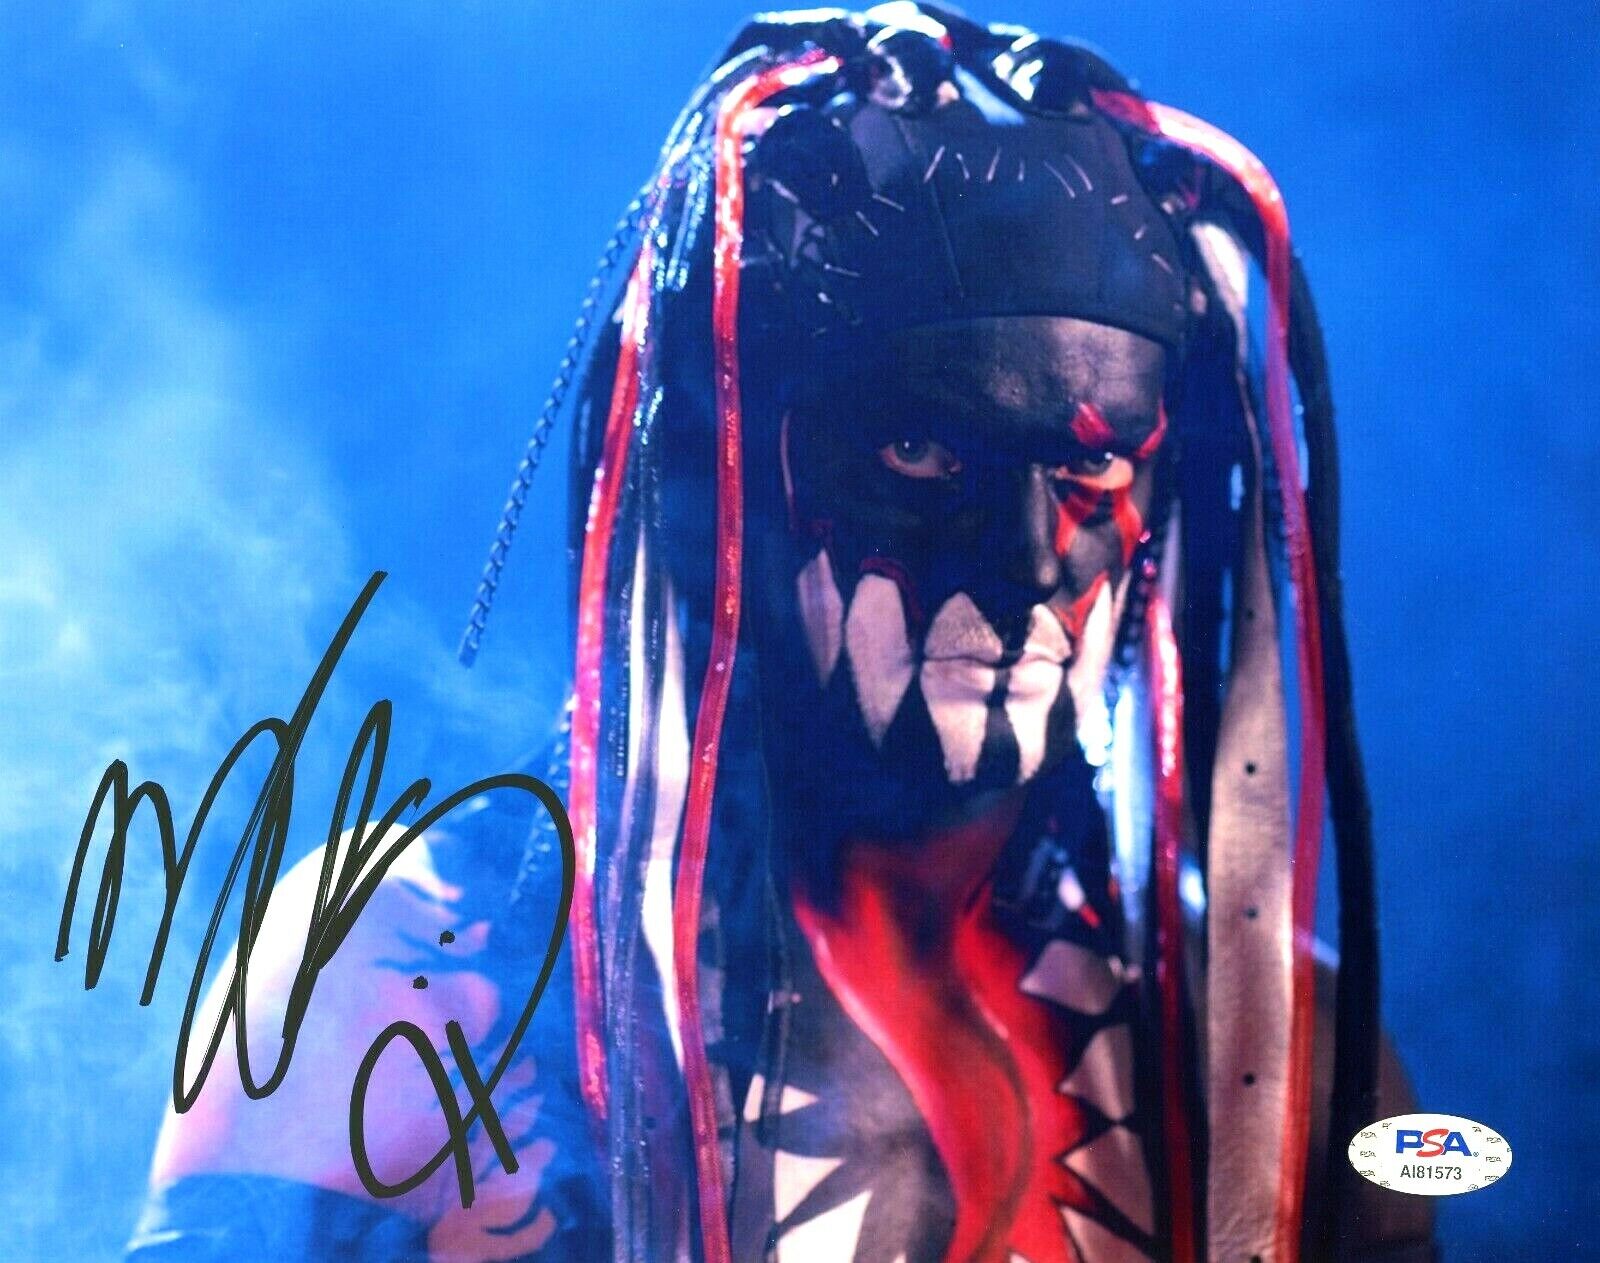 WWE FINN BALOR HAND SIGNED AUTOGRAPHED 8X10 Photo Poster painting WITH PROOF AND PSA DNA COA 40